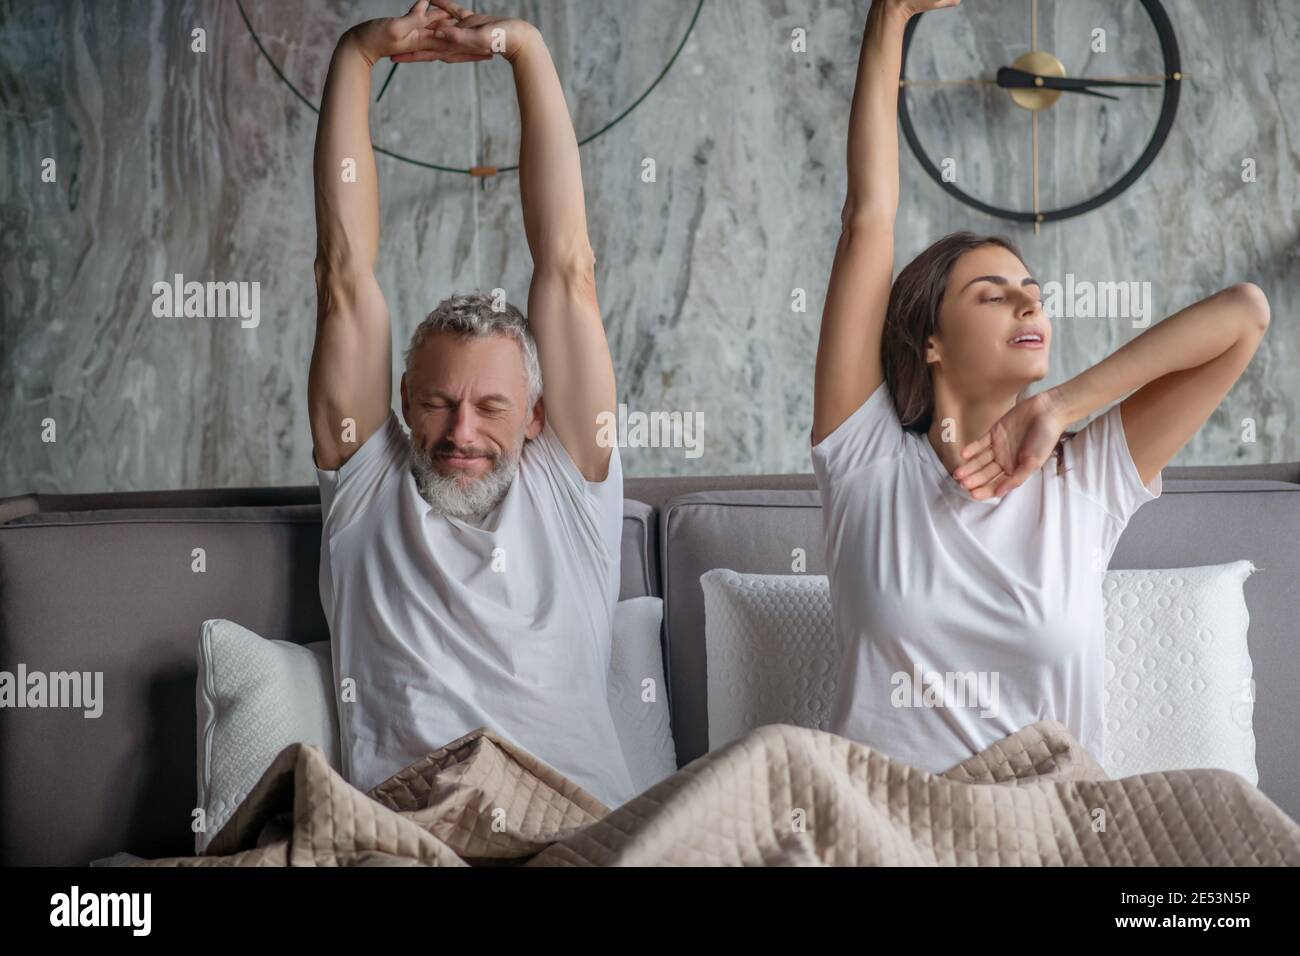 Man and woman waking up stretching in bed Stock Photo